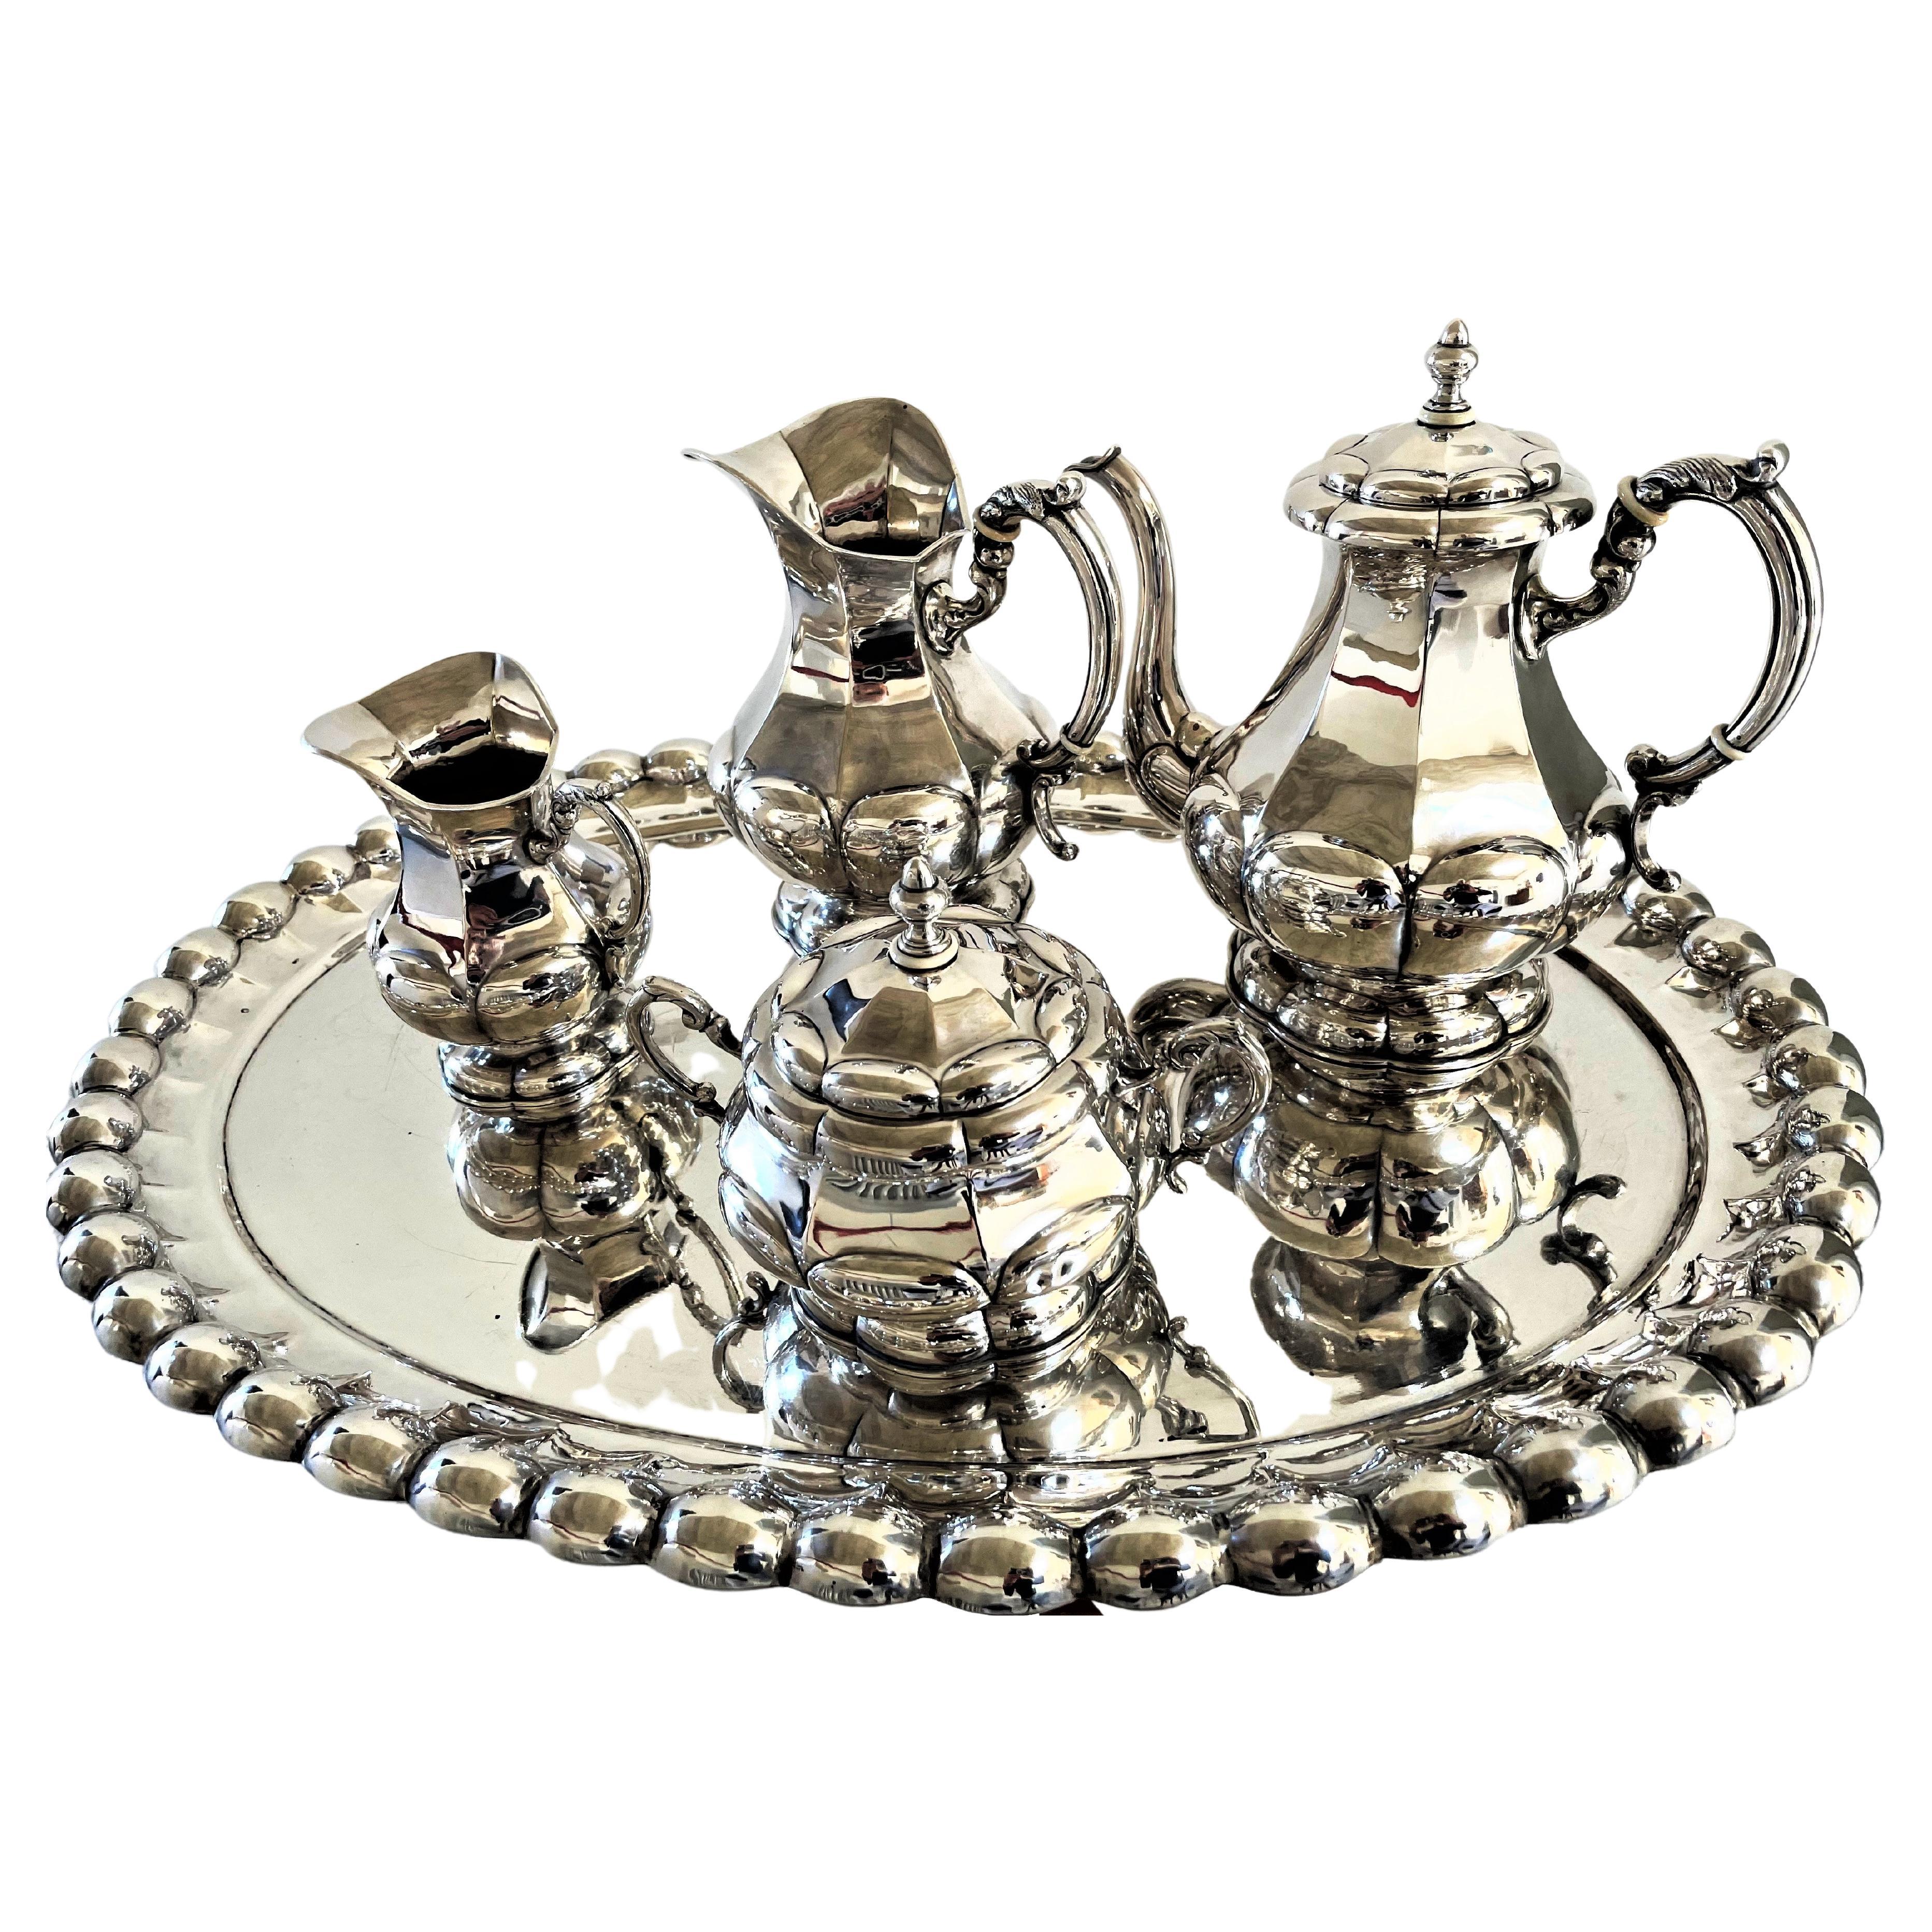 An exceptional, Impressive 4 parts Coffee service that stands on the tray made for it. All parts are hallmarked with the Austria - Hungarian DIANA head from 1870. Total weight of 5 parts 4 324 grams /900 sterling
Measurement: 
The tray :      